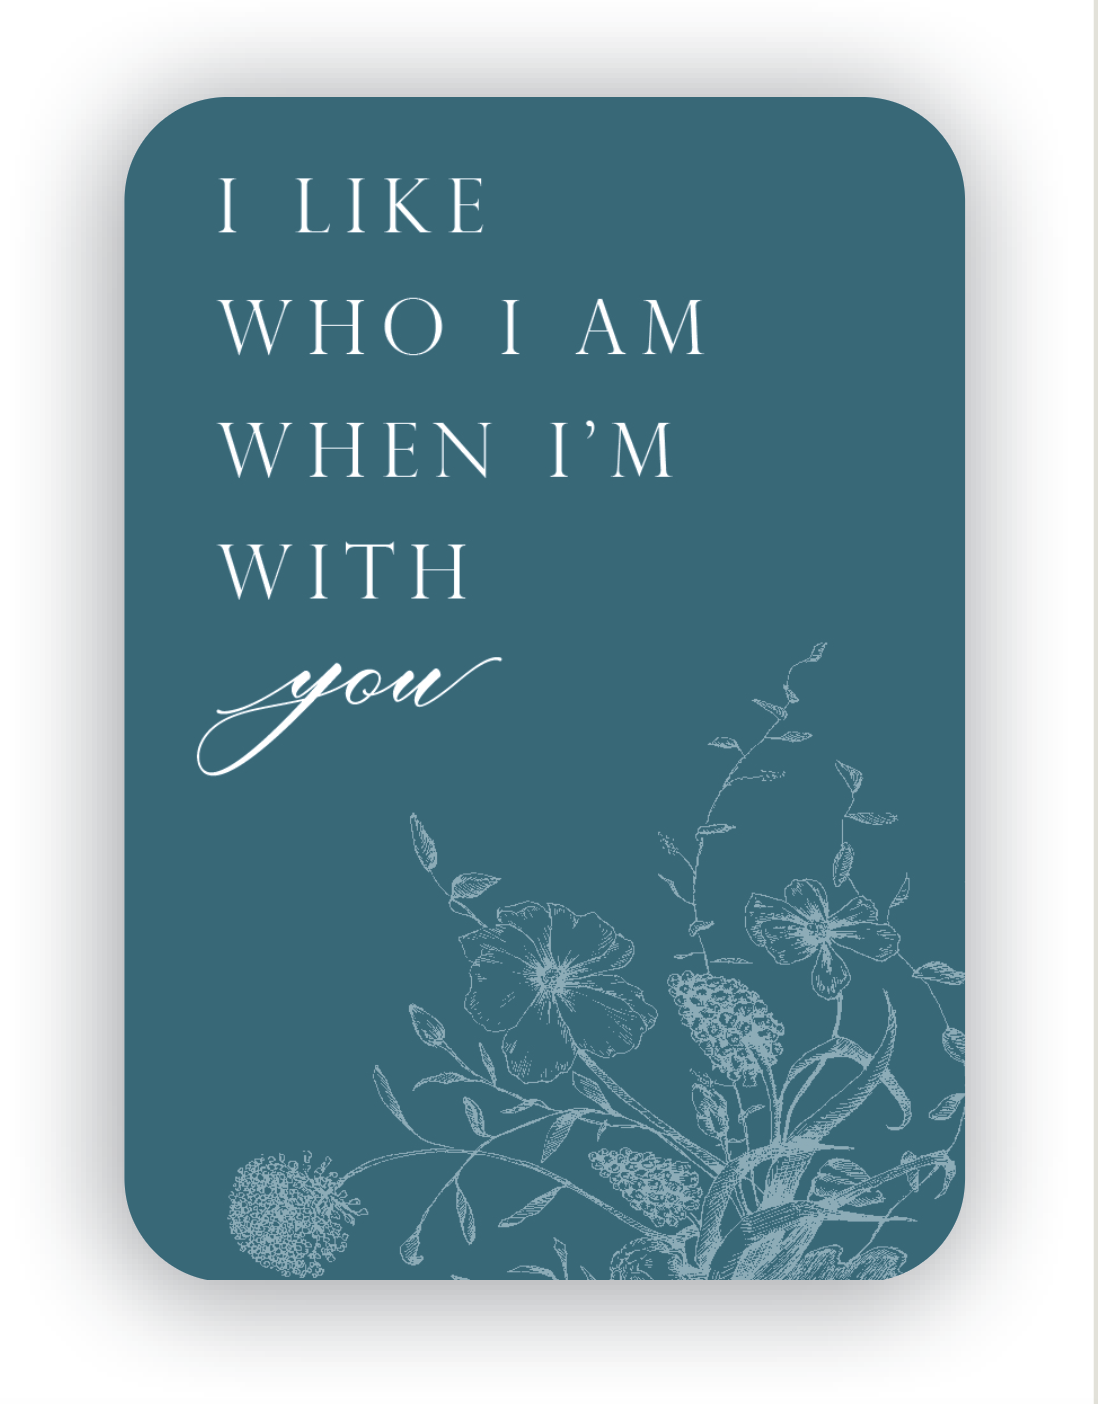 Digital teal mini card with florals that says "I like who I am with I'm with you" by Rust Belt Love